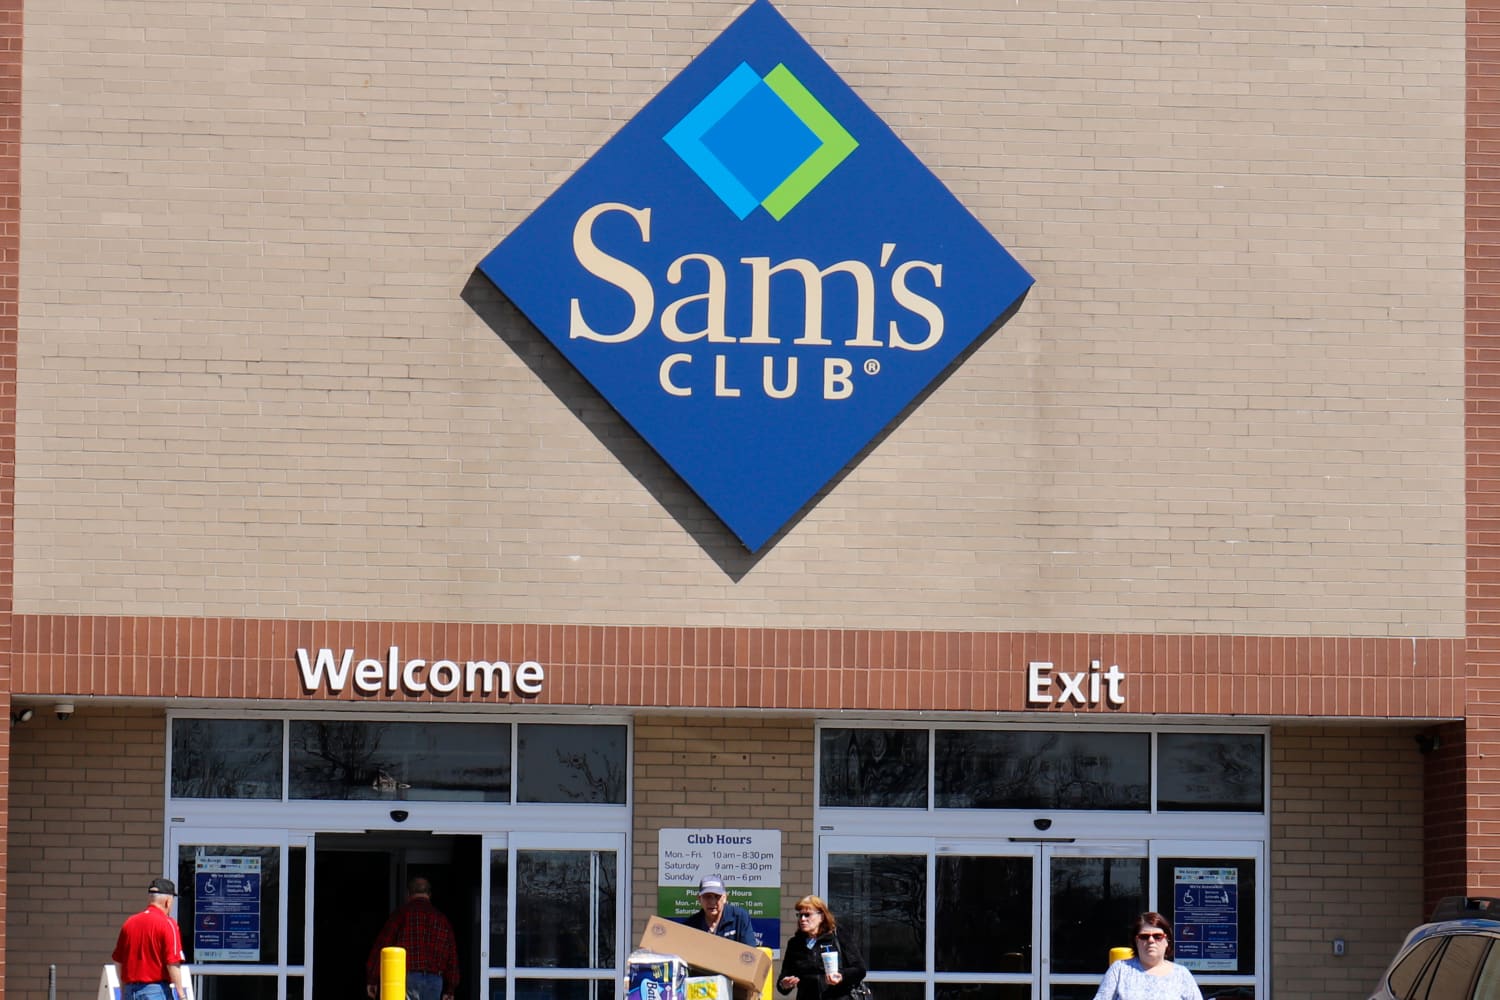 A Beginner's Guide To Food Shopping At Sam's Club